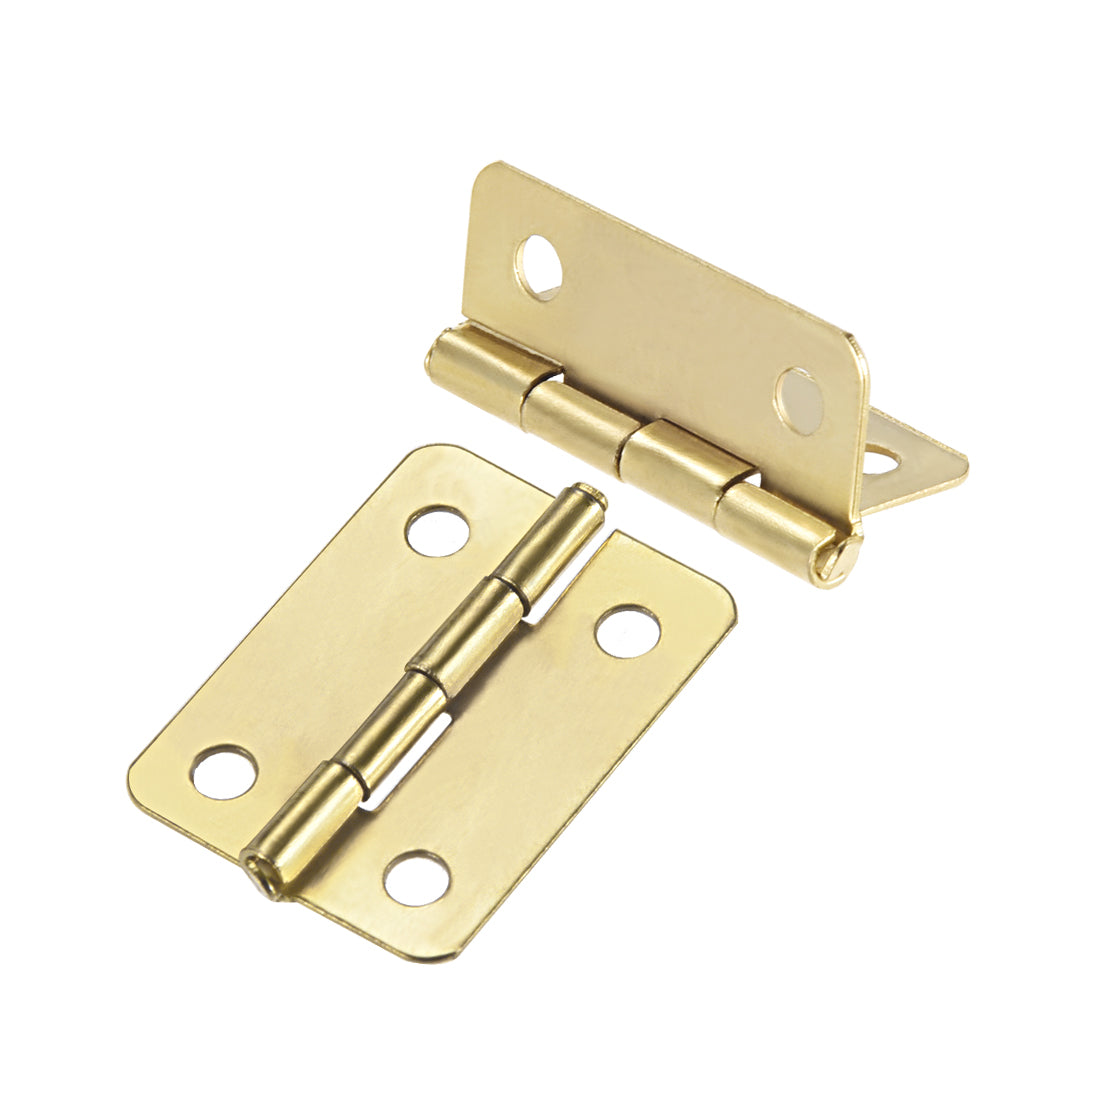 uxcell Uxcell 0.98" Mini Hinge Jewelry Case Wooden Box Hinges Fittings Golden Plain 15pcs